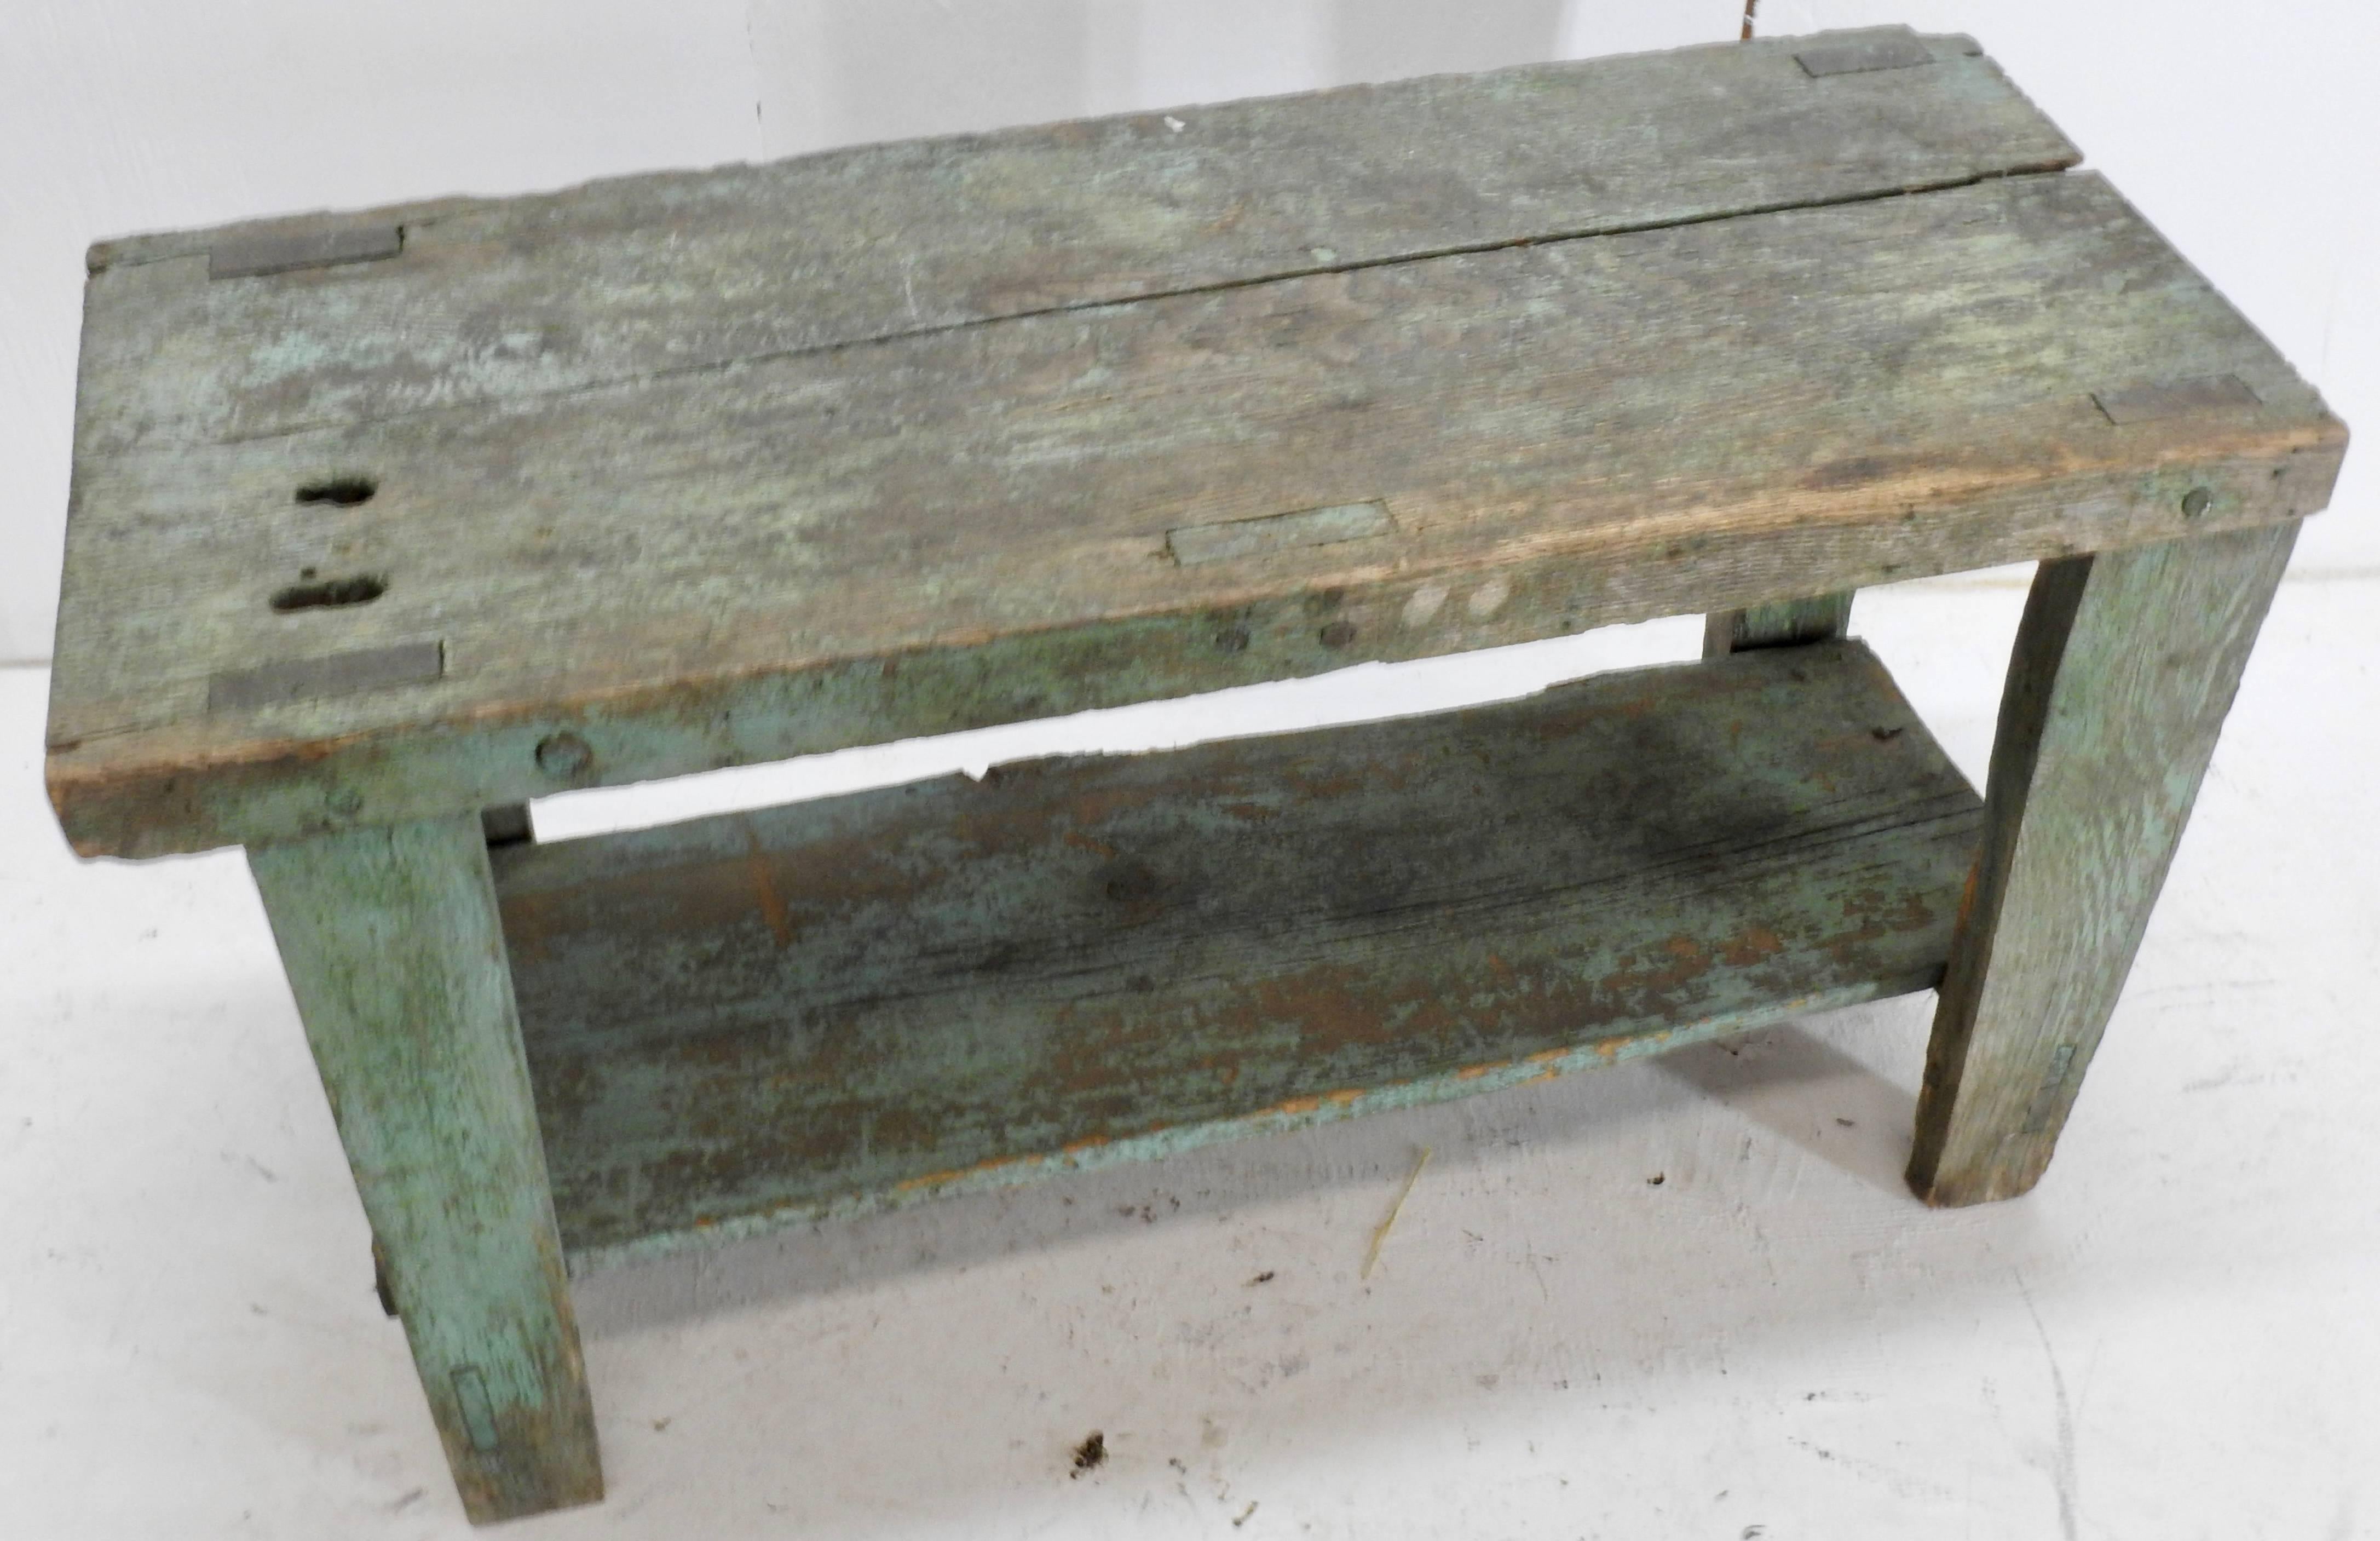 This is a rustic, primitive wooden bench featuring wood with a nice turquoise green aged patina. Has a lot of character to accent your home. The wear to the table makes you wonder about its history!